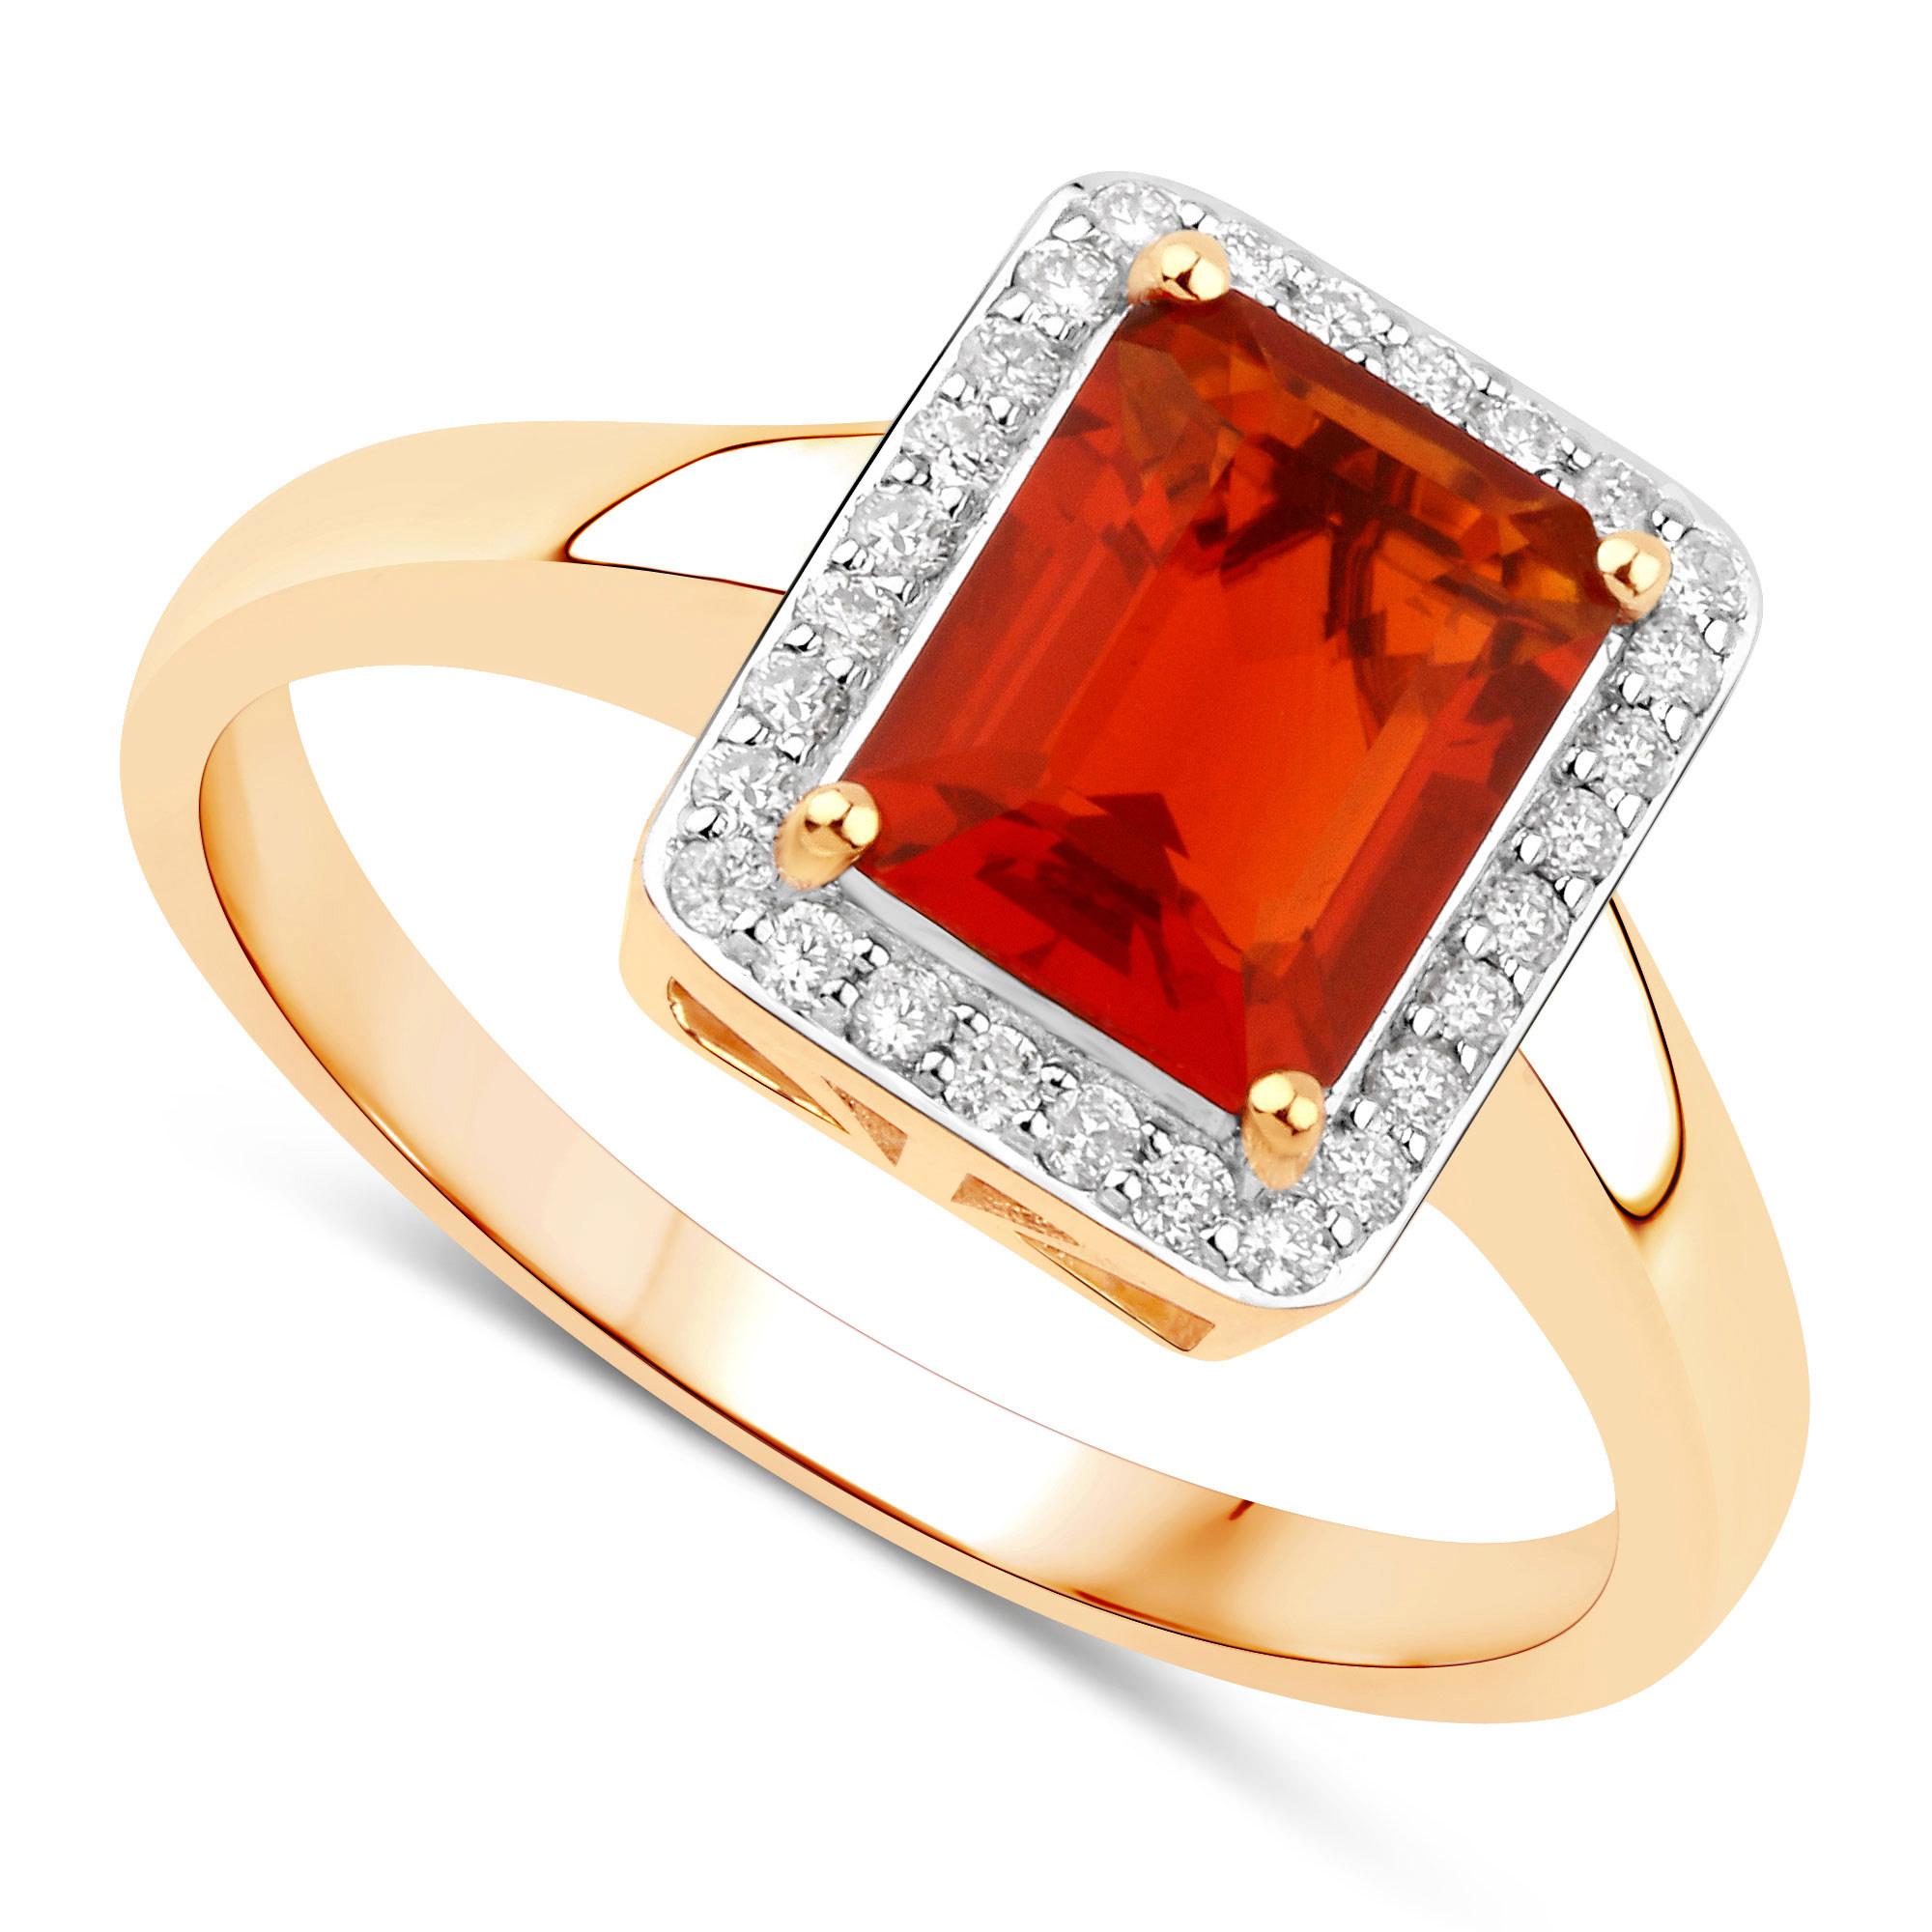 Emerald Cut Natural Fire Opal and Diamond Halo Ring 1.20 Carats 14K Yellow Gold For Sale